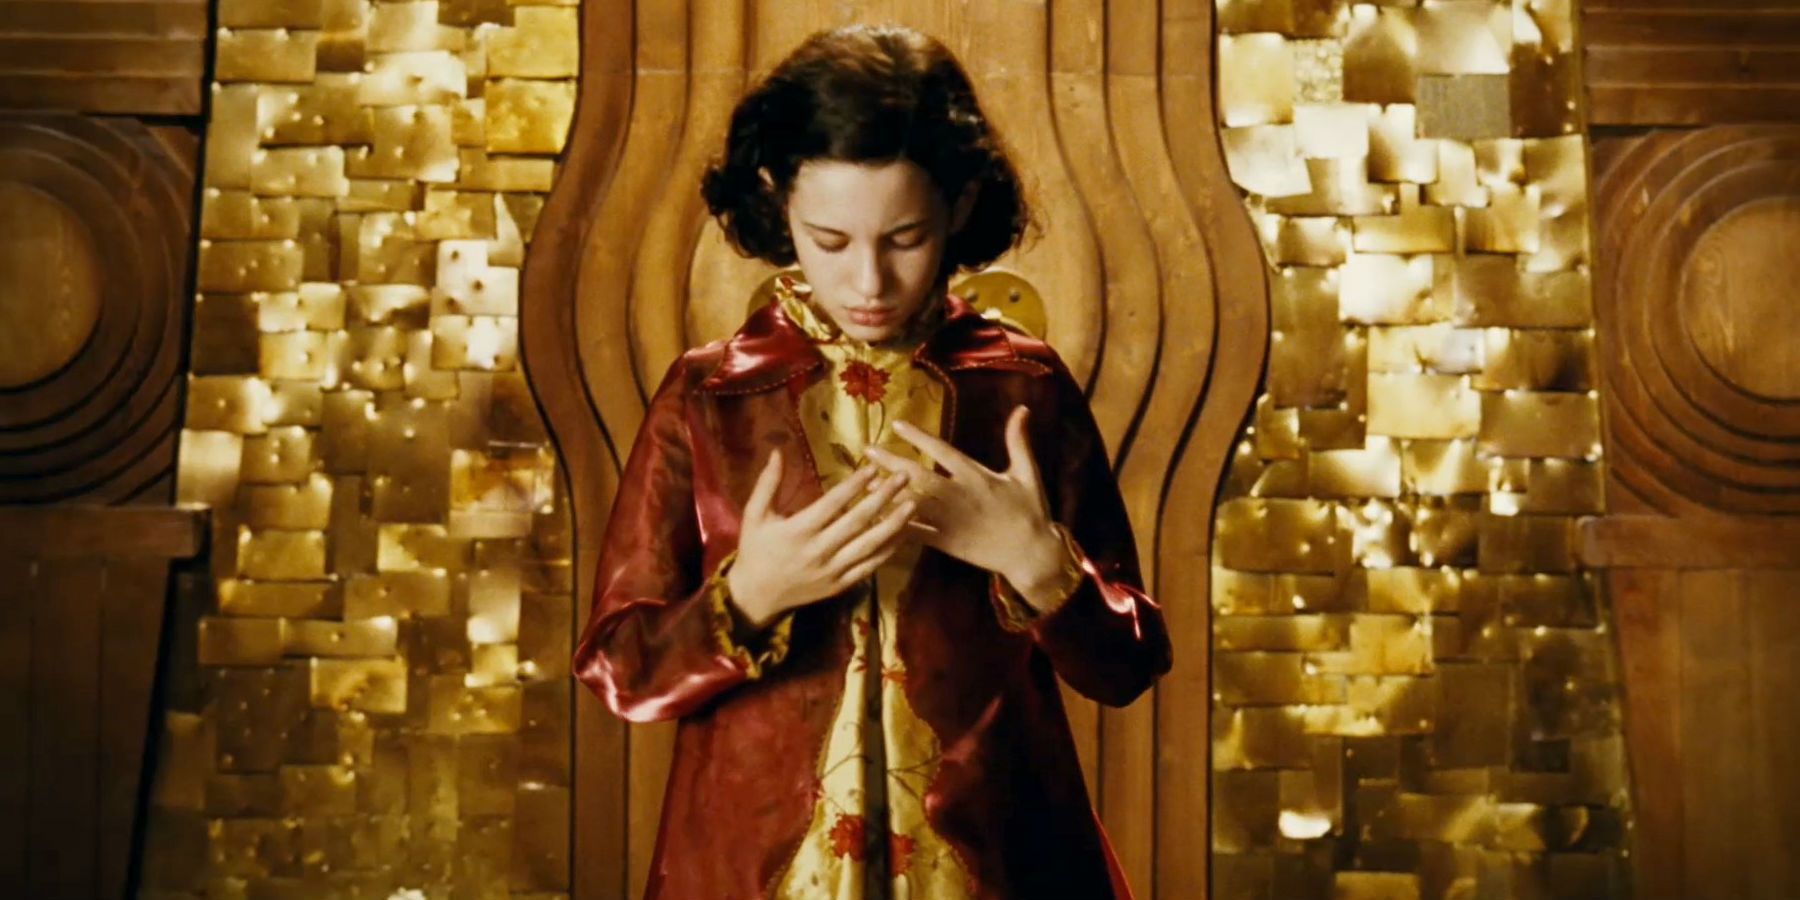 Pan's Labyrinth - Ofelia in gold chamber